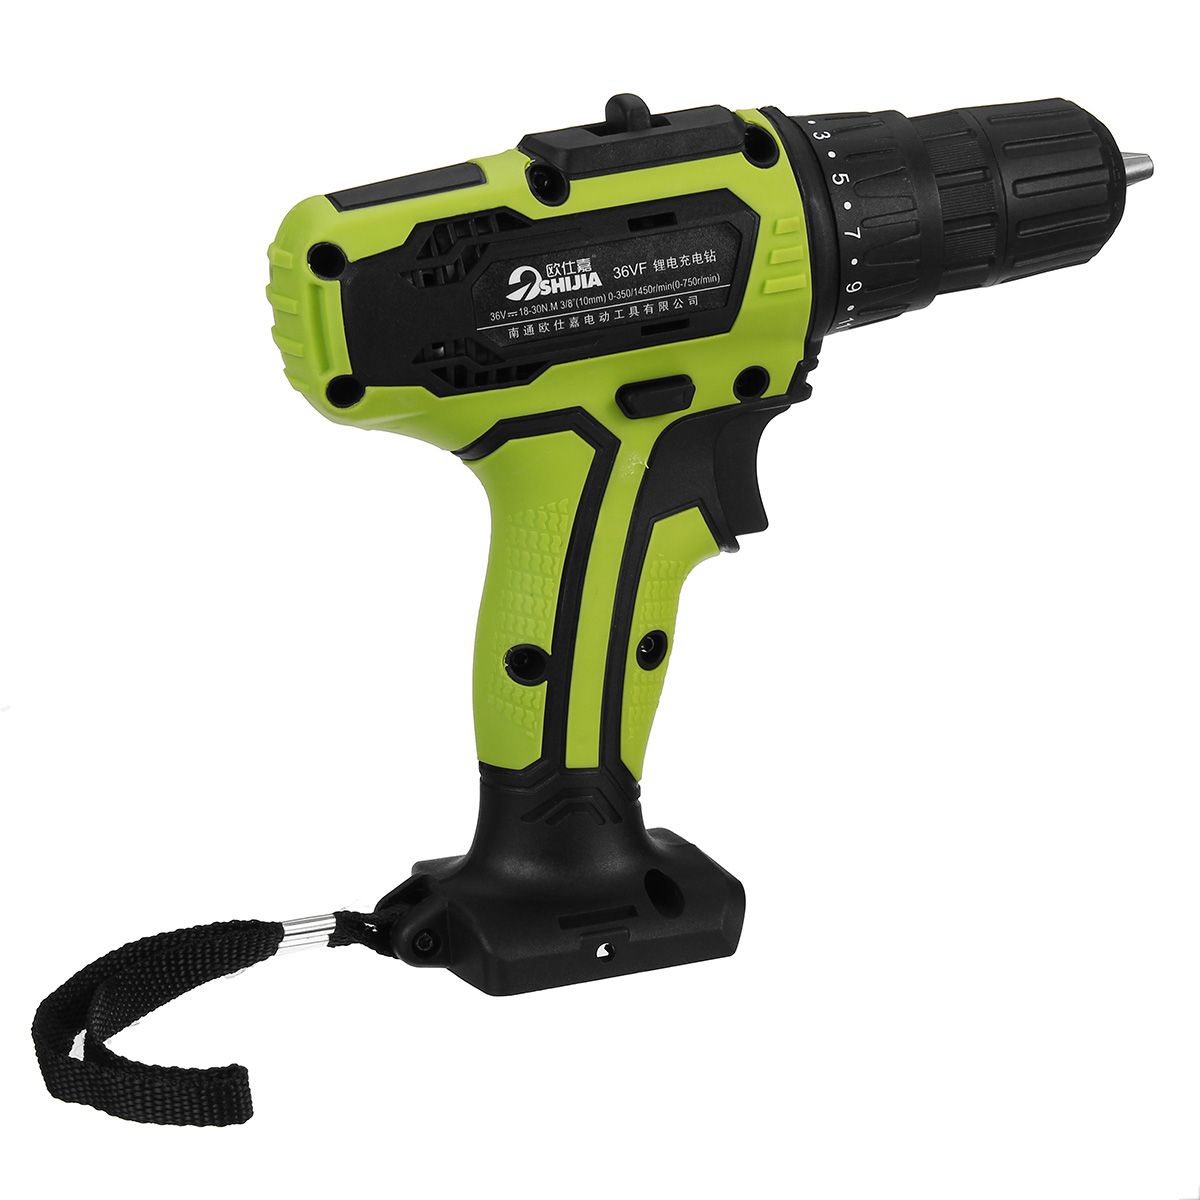 48VF-Cordless-Electric-Drill-Screwdriver-Driver-W-1-or-2-Li-ion-Battery-1707933